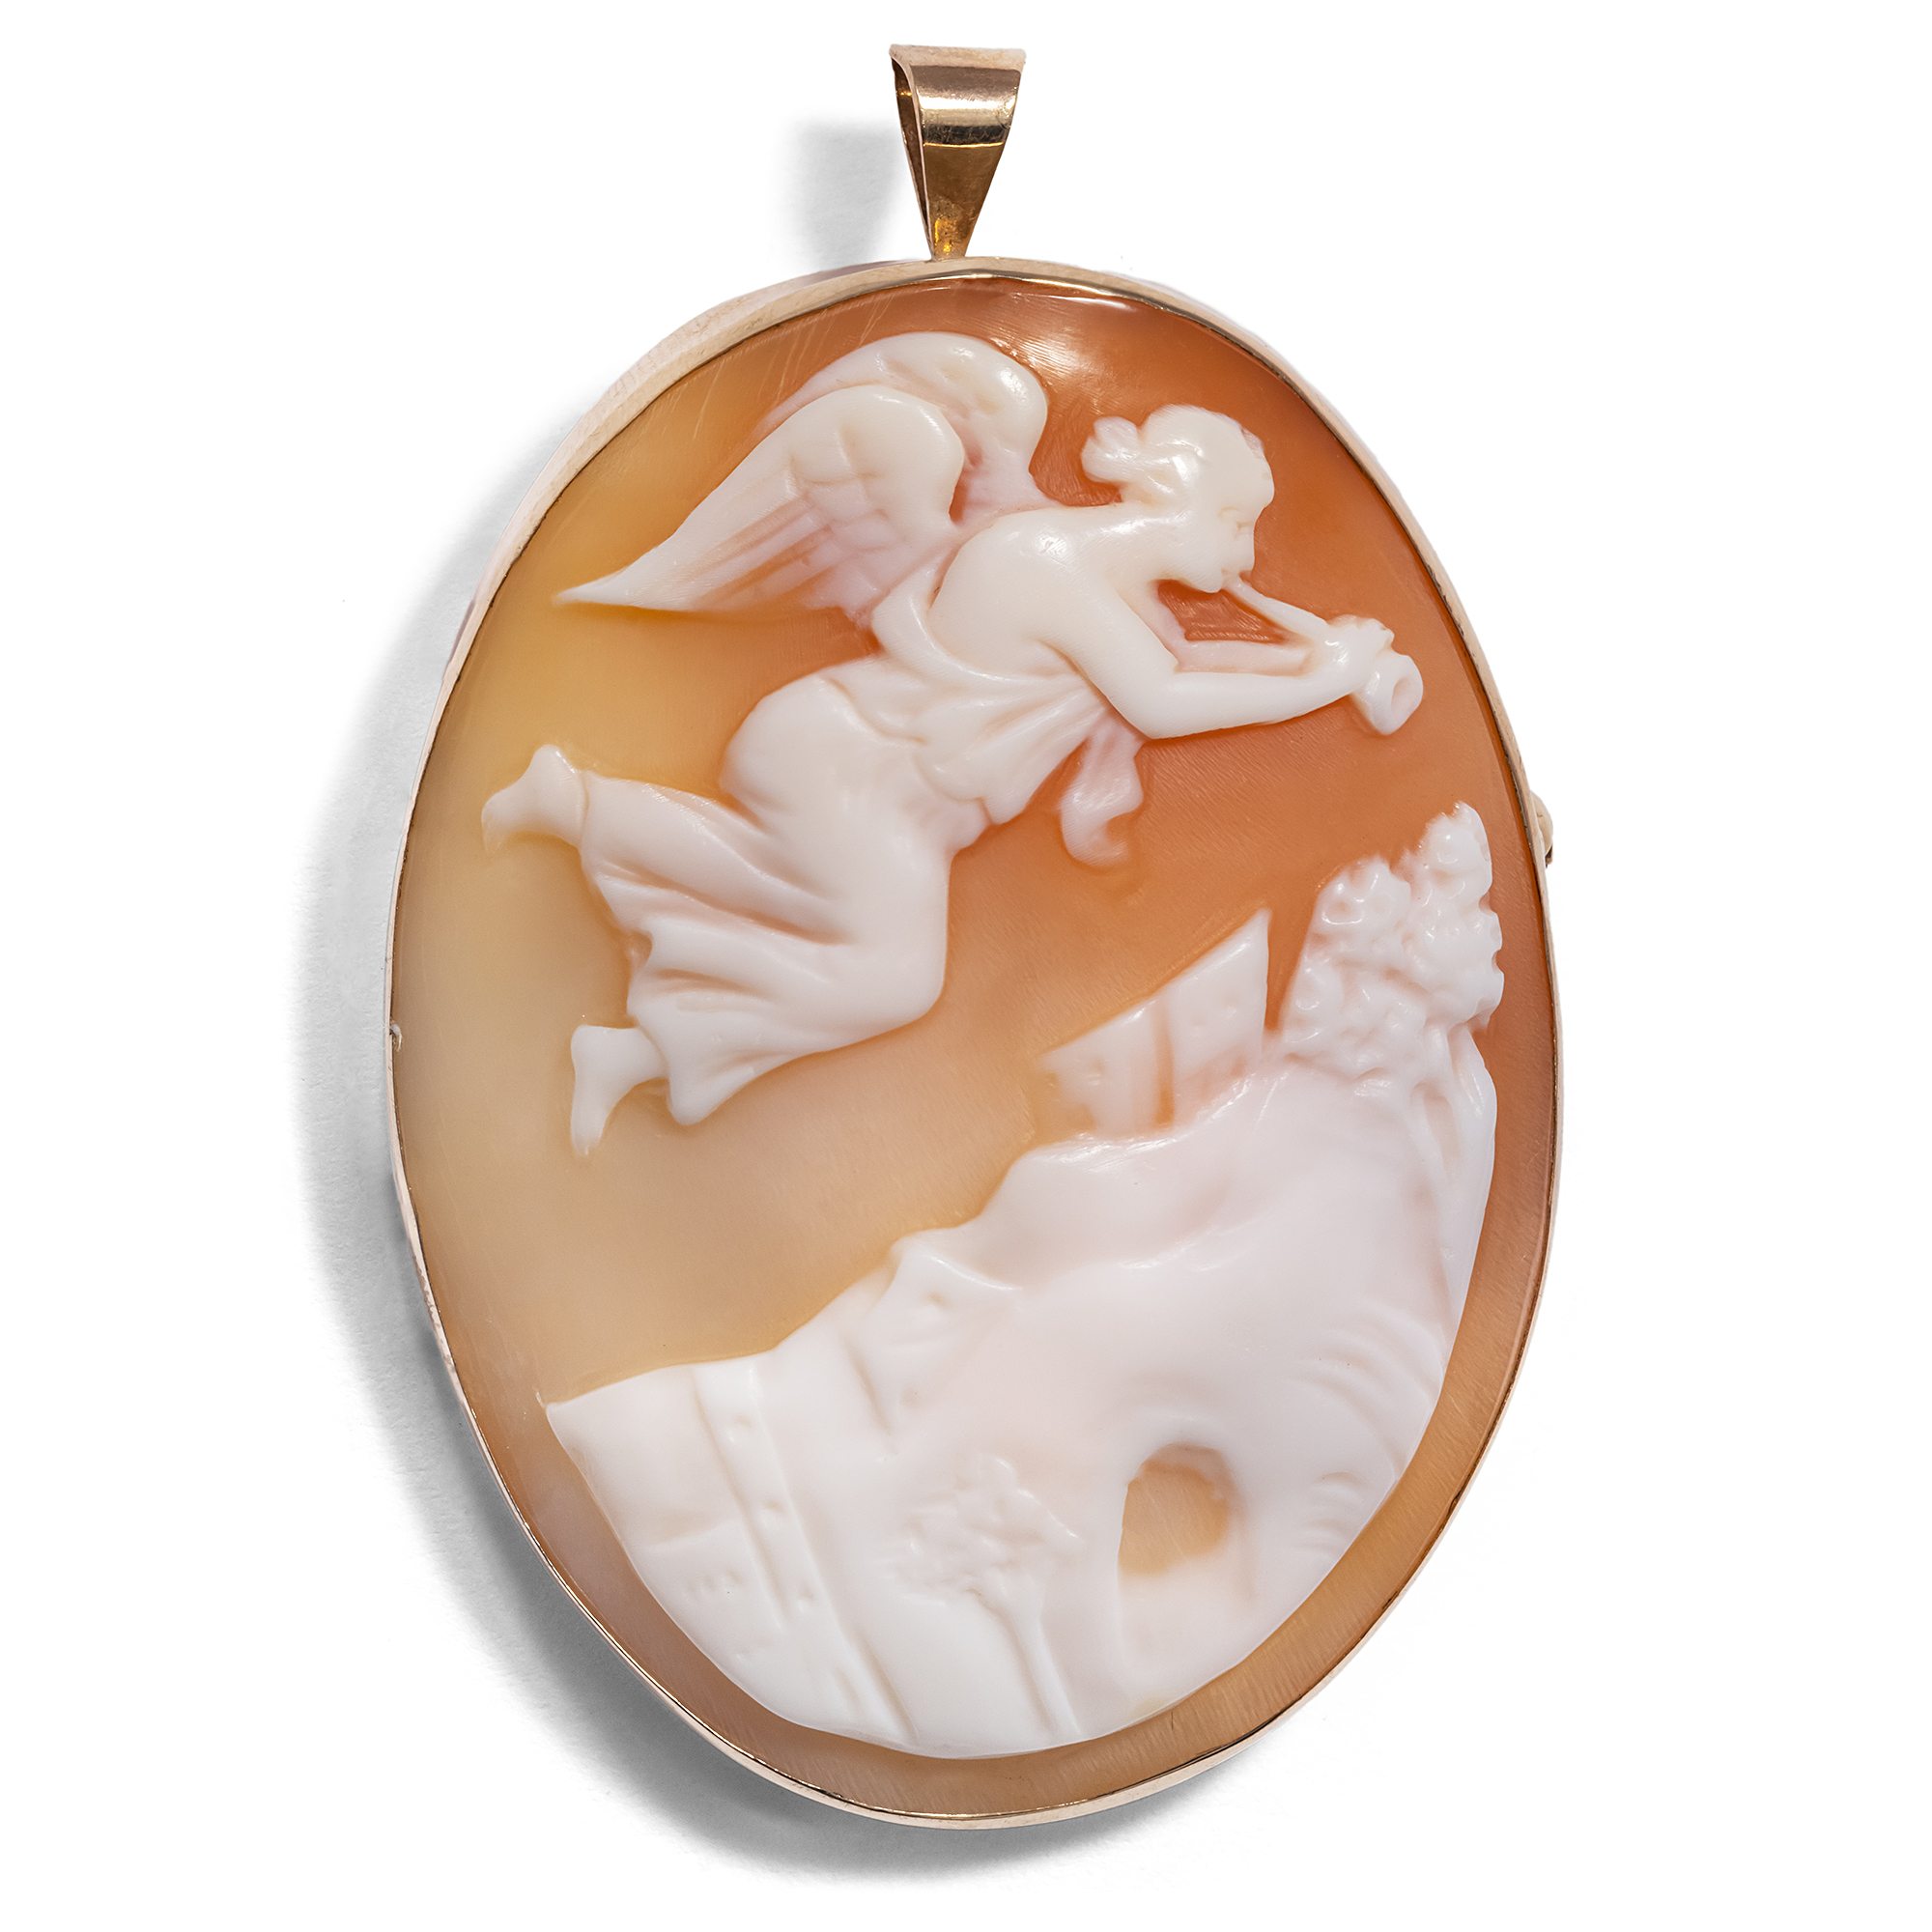 Classic Pendant Brooch with Shell Cameo in Gold, 2nd Half of the 20th Century